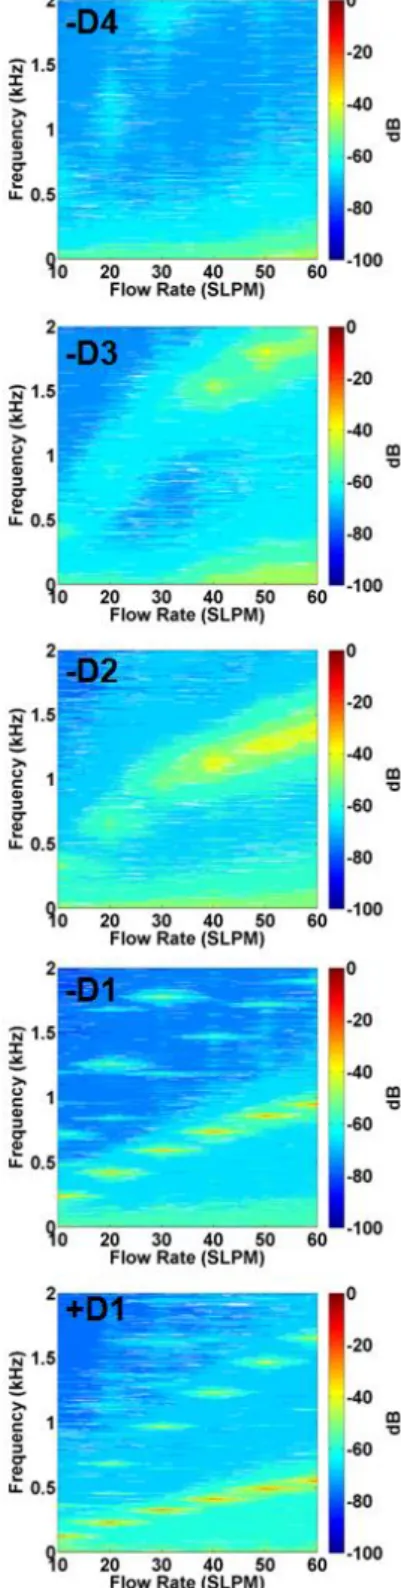 Figure 7. The frequency maps for designs +D2 to +D6 for a  flow rate range from 10 SLPM to 60 SLPM